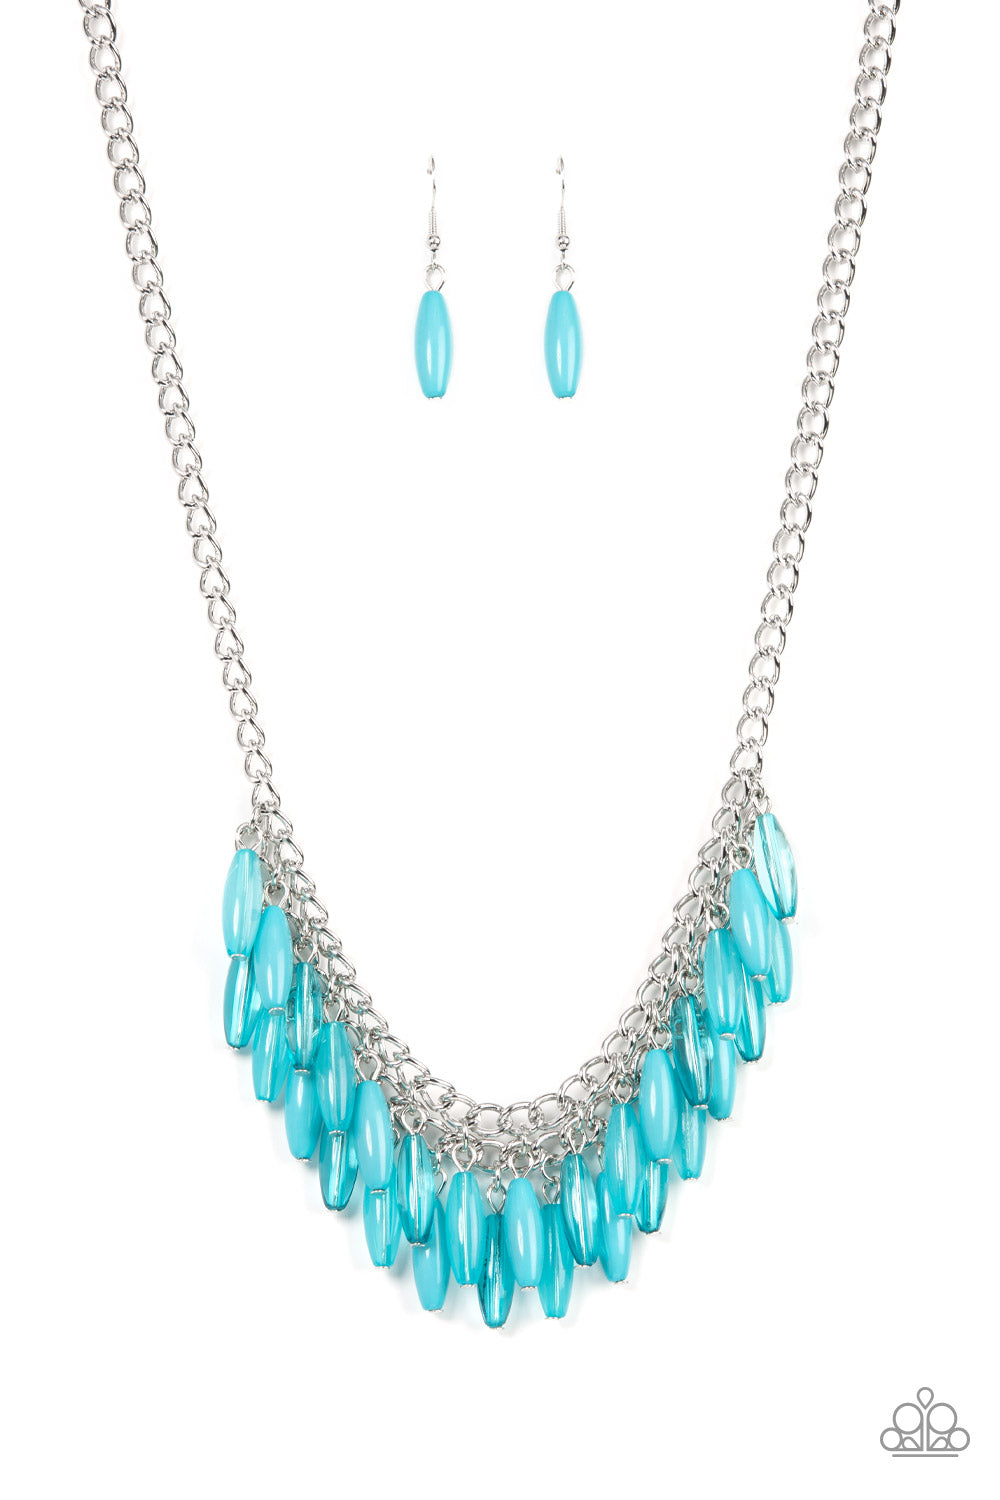 Paparazzi Beach House Hustle Blue Necklace. $5 Jewelry. Get Free Shipping. #P2WH-BLXX-444XX